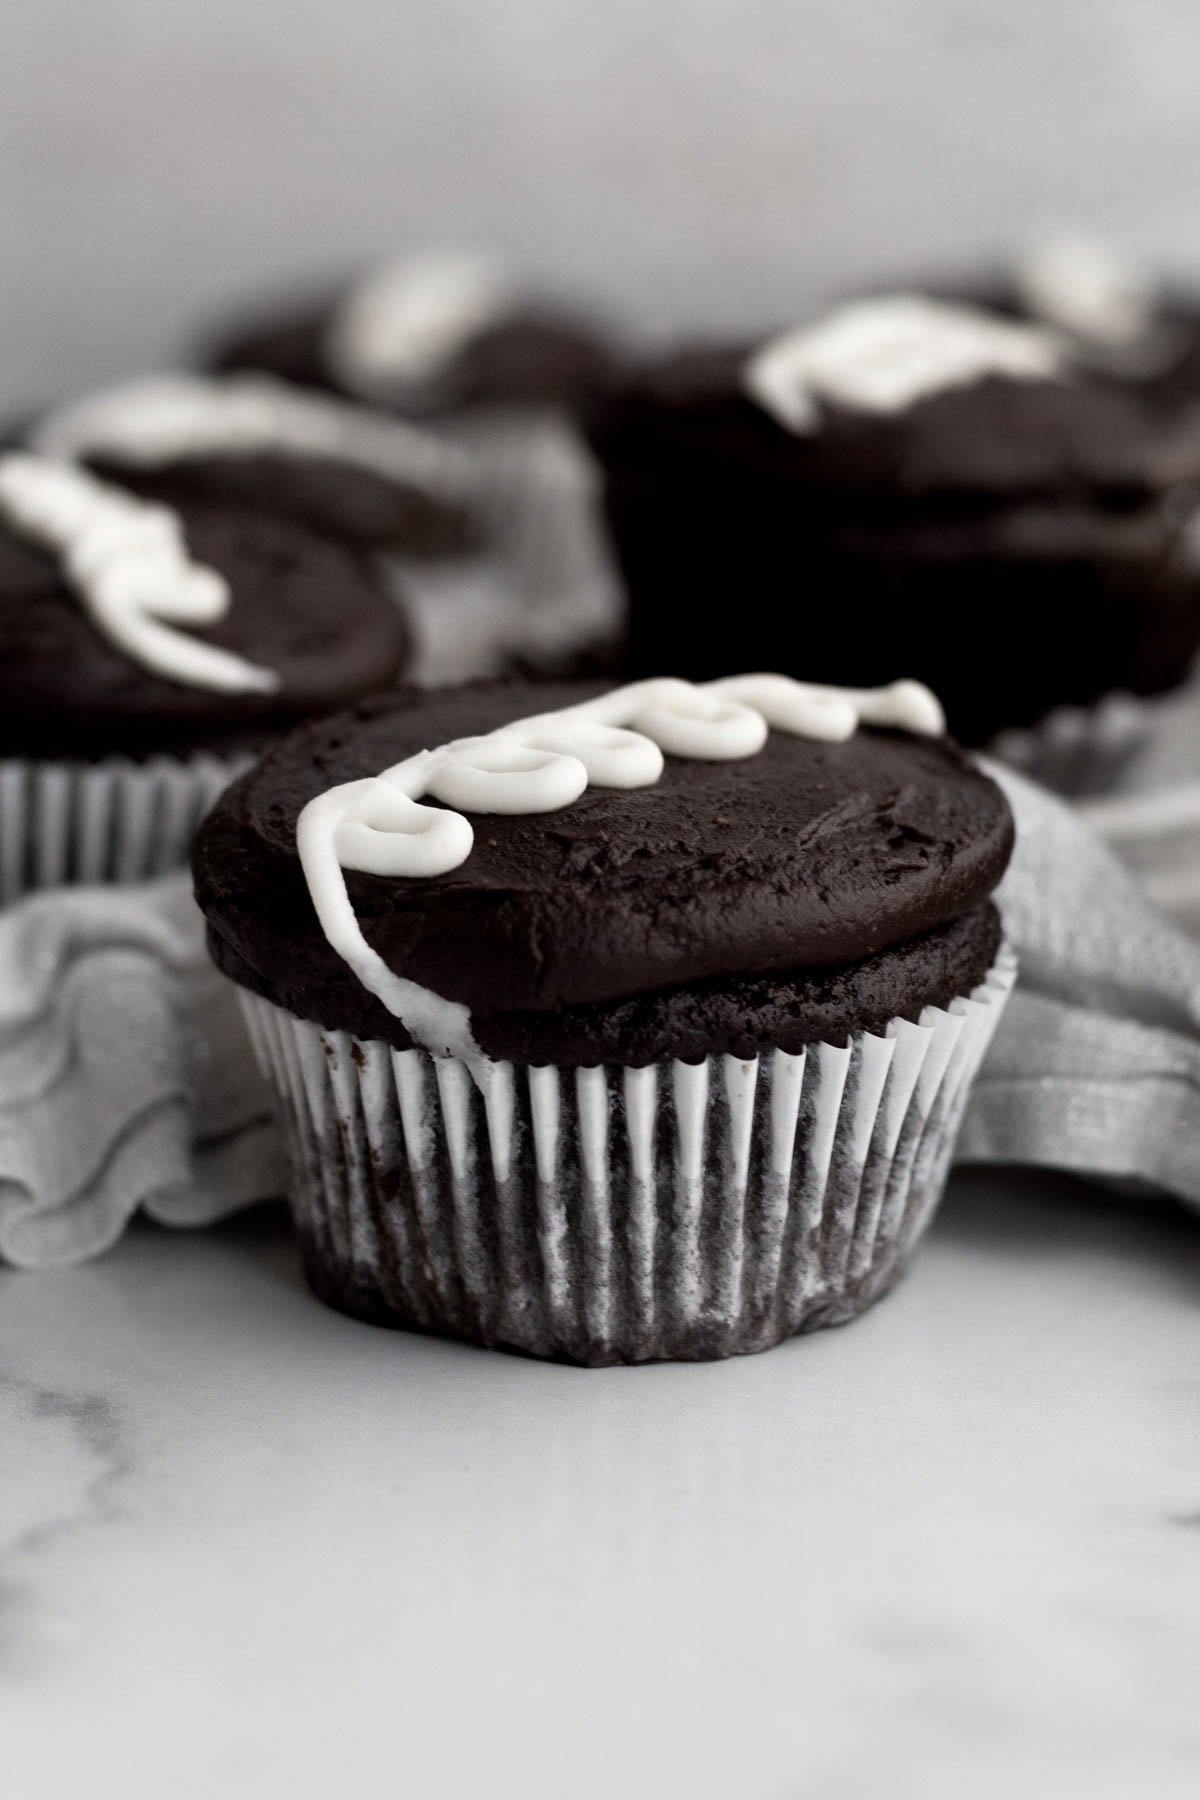 A classic chocolate cupcake with a looped swirl of vanilla frosting.